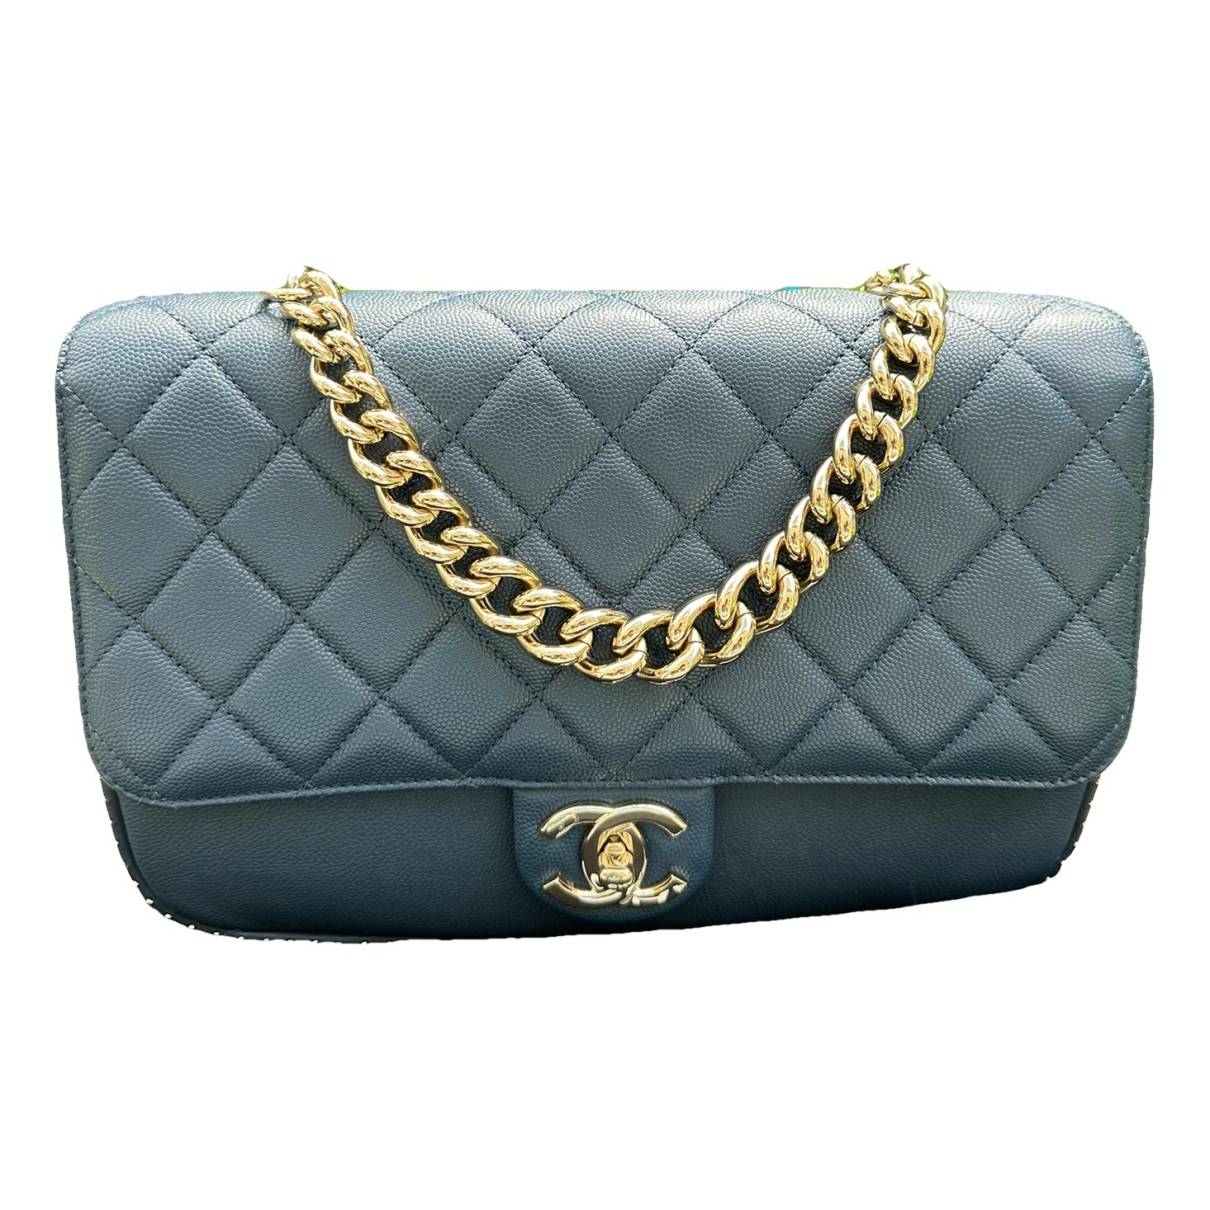 Business affinity leather handbag Chanel Blue in Leather - 34201804